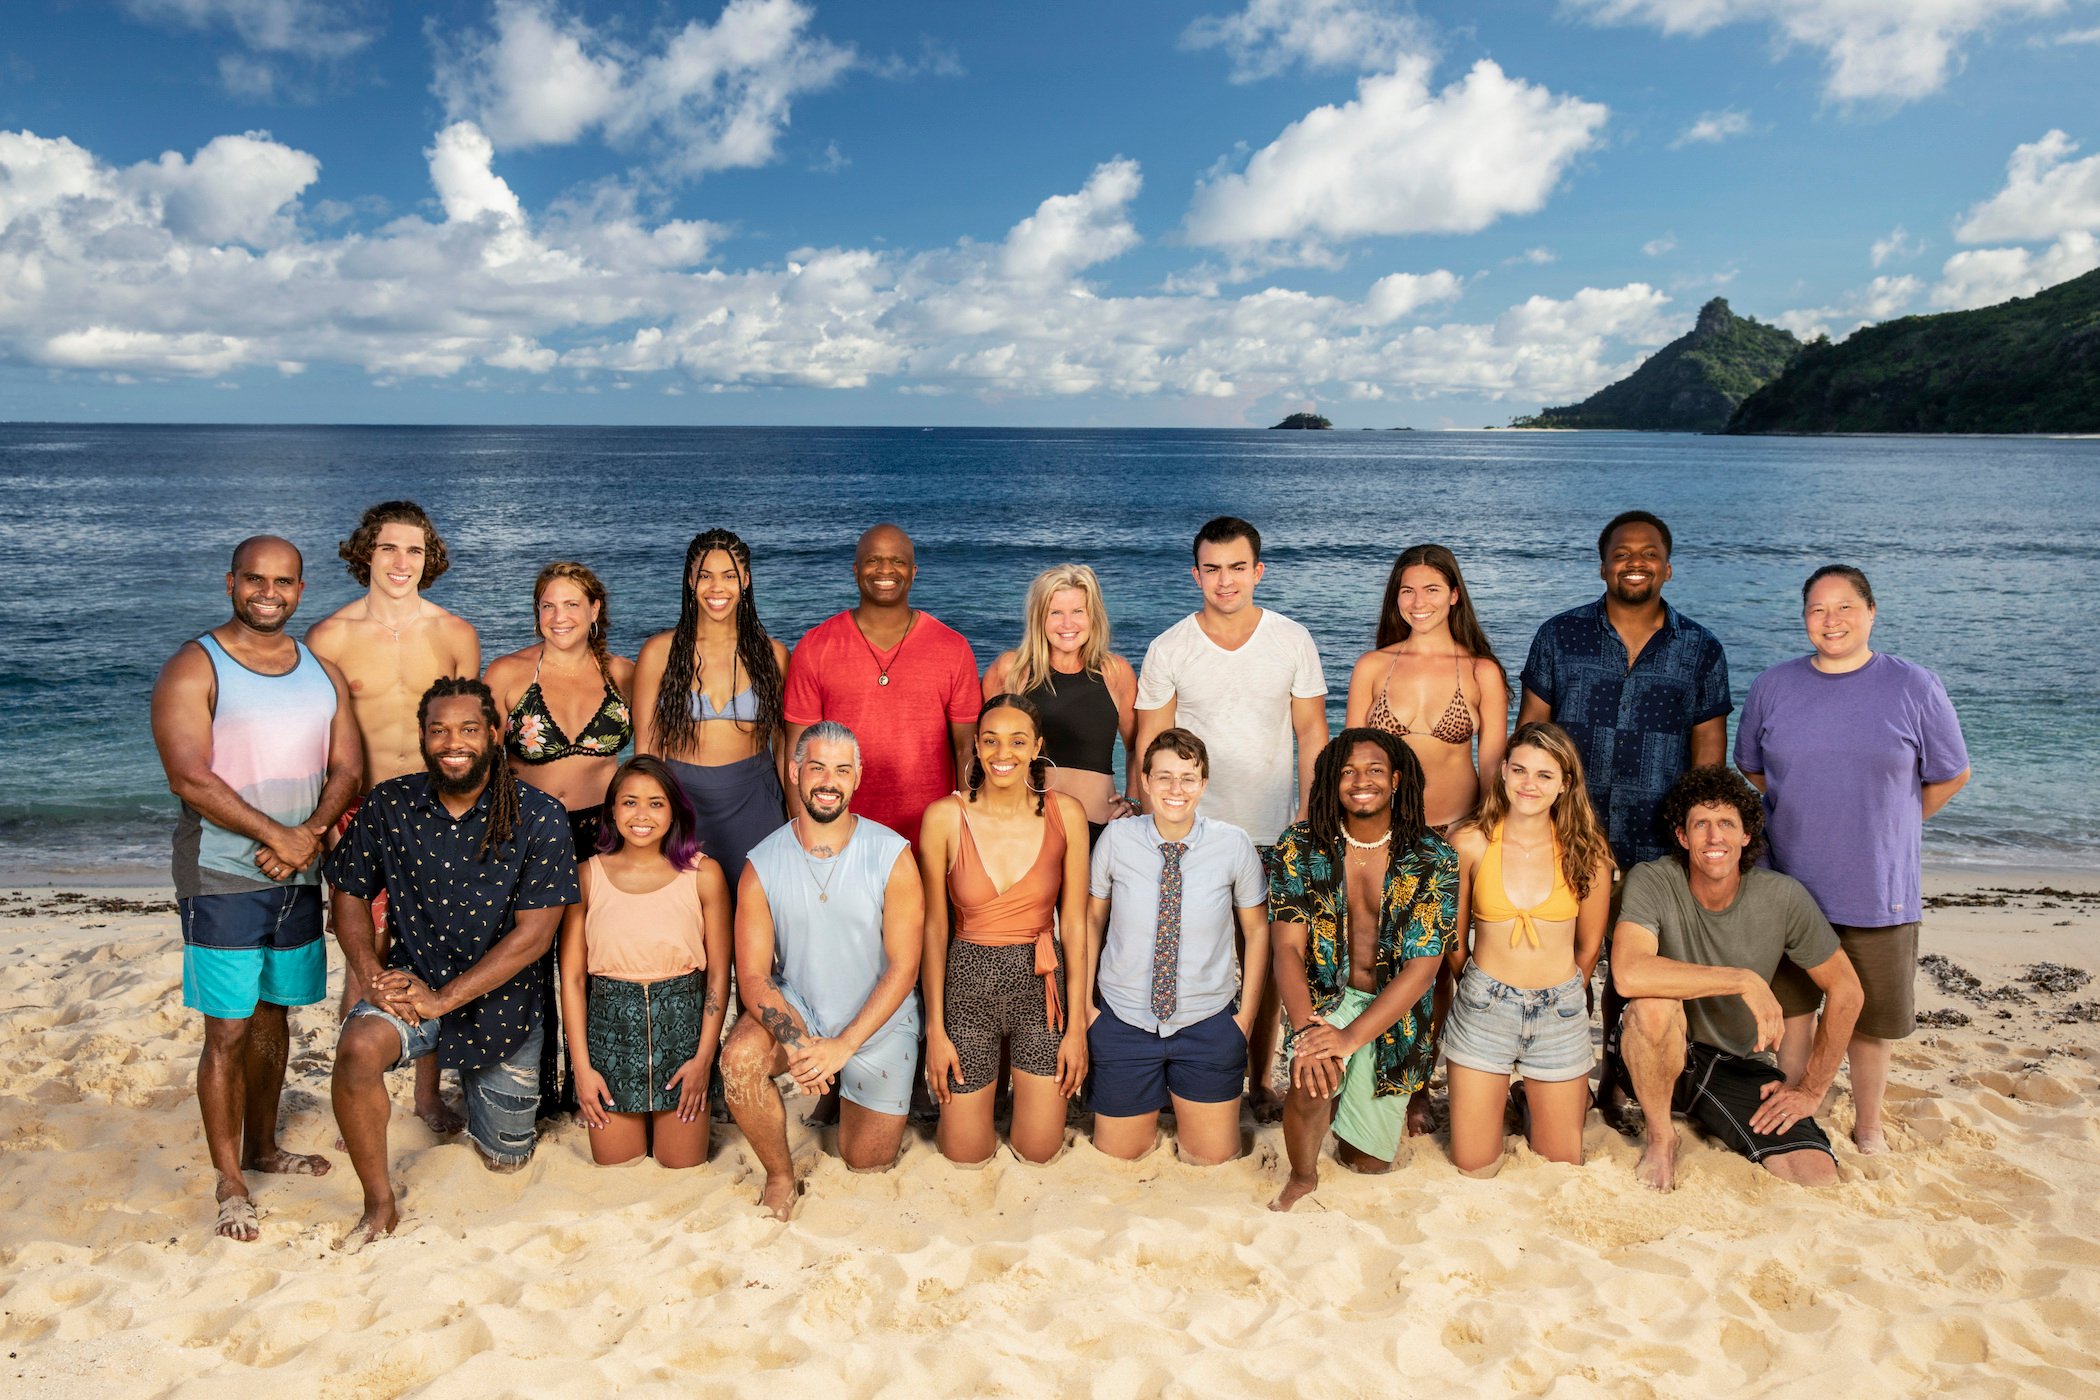 'Survivor' Season 41 cast kneeling on the beach and smiling at the camera